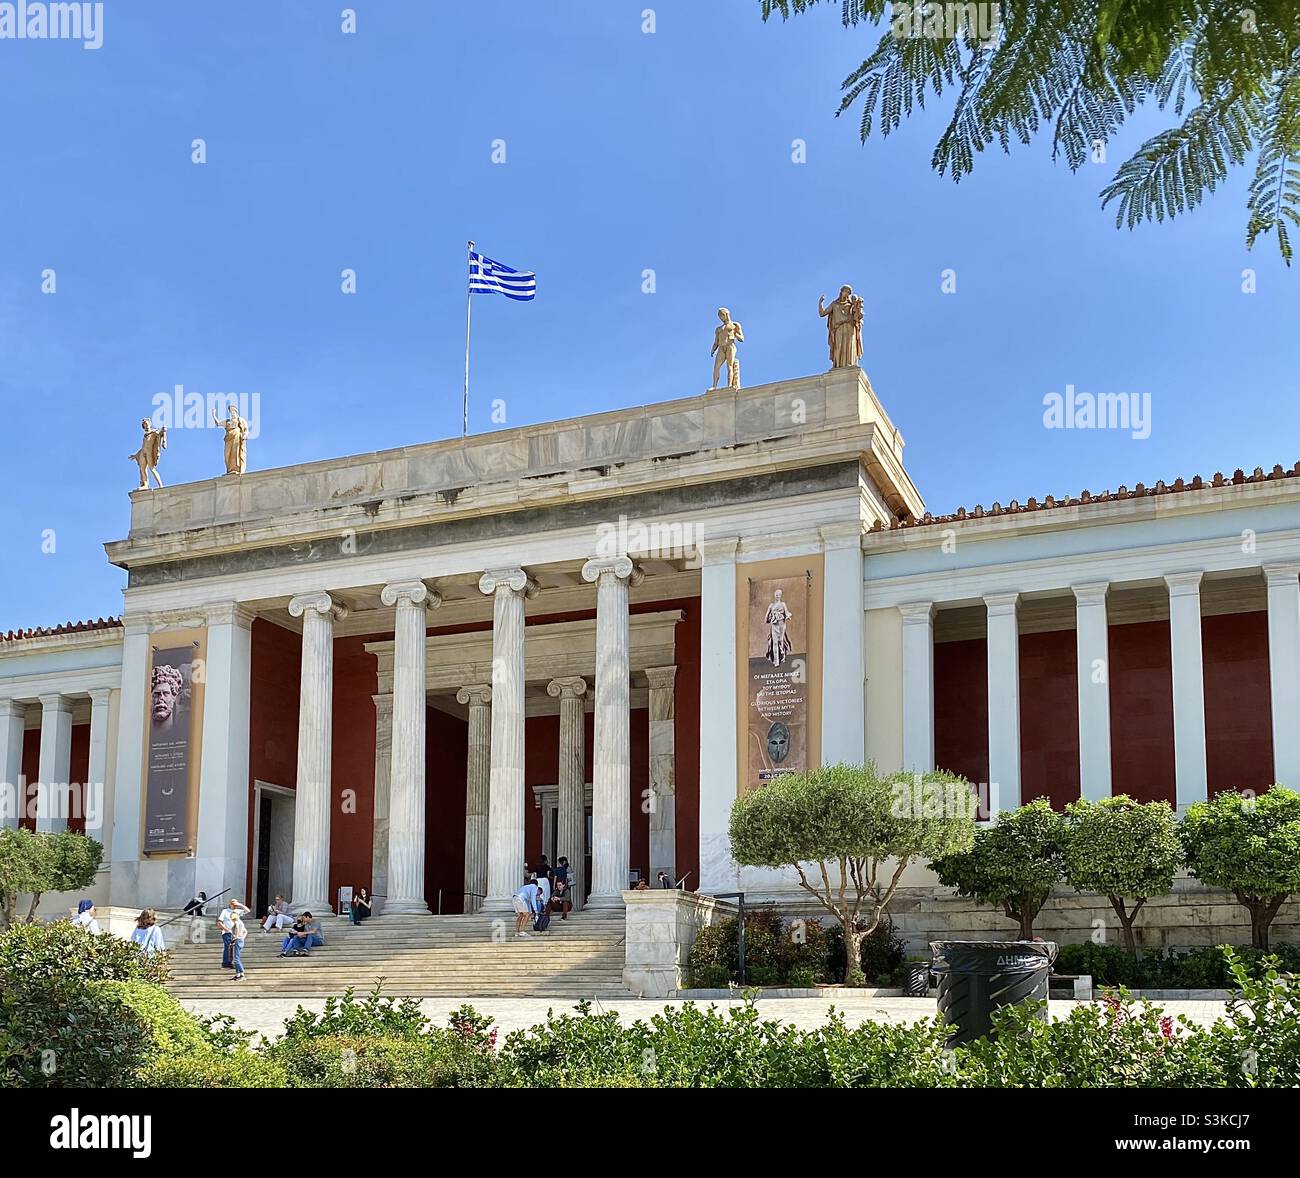 The National Archaeological Museum of Athens, Greece, a world-class museum with very important and rich collections of artefacts from around the Greek world.Completed in 1889 in neo-classical style. Stock Photo